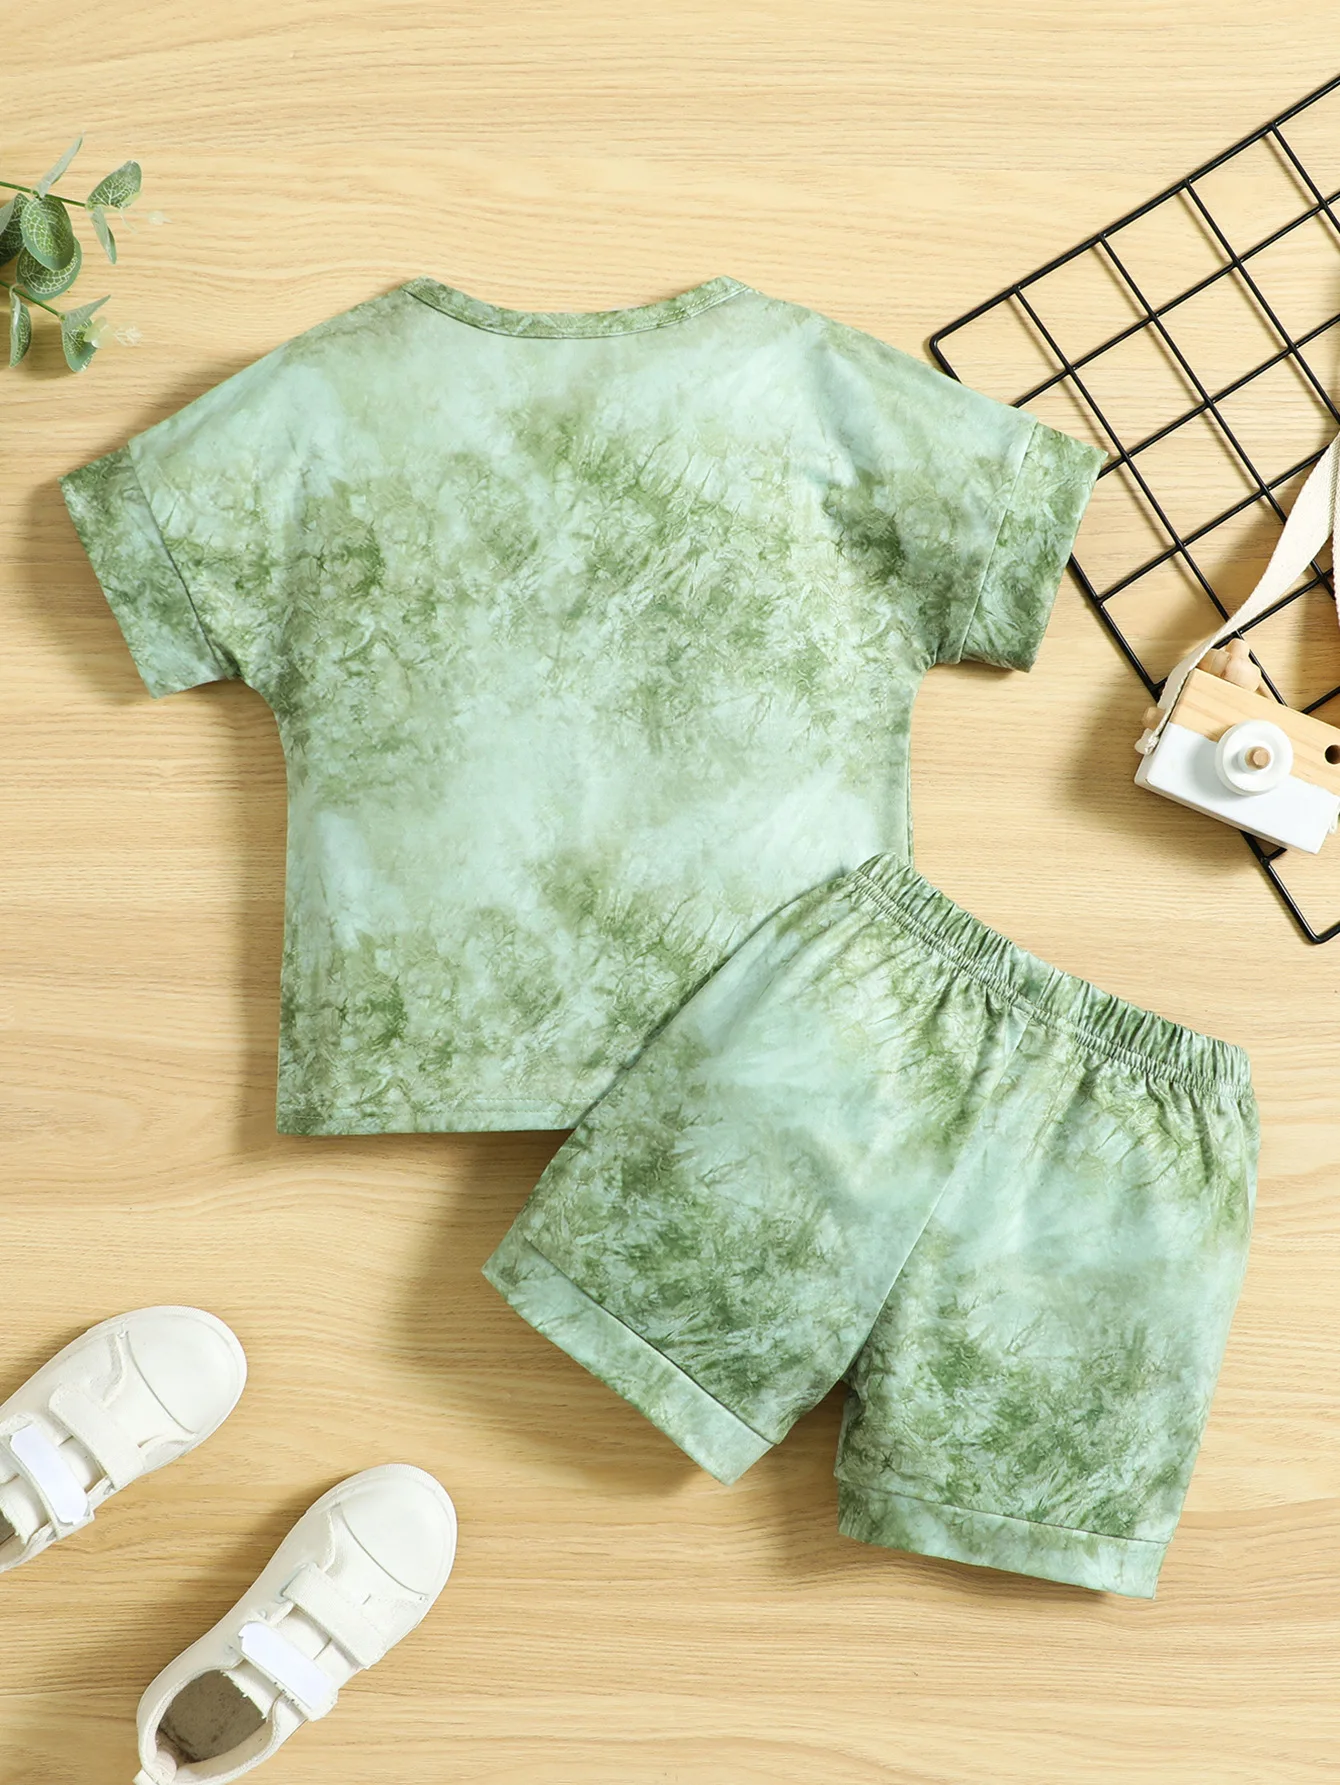 New fashion summer children tie-dye outfits girl's sports suit biker shorts set casual two-piece clothing set for girls